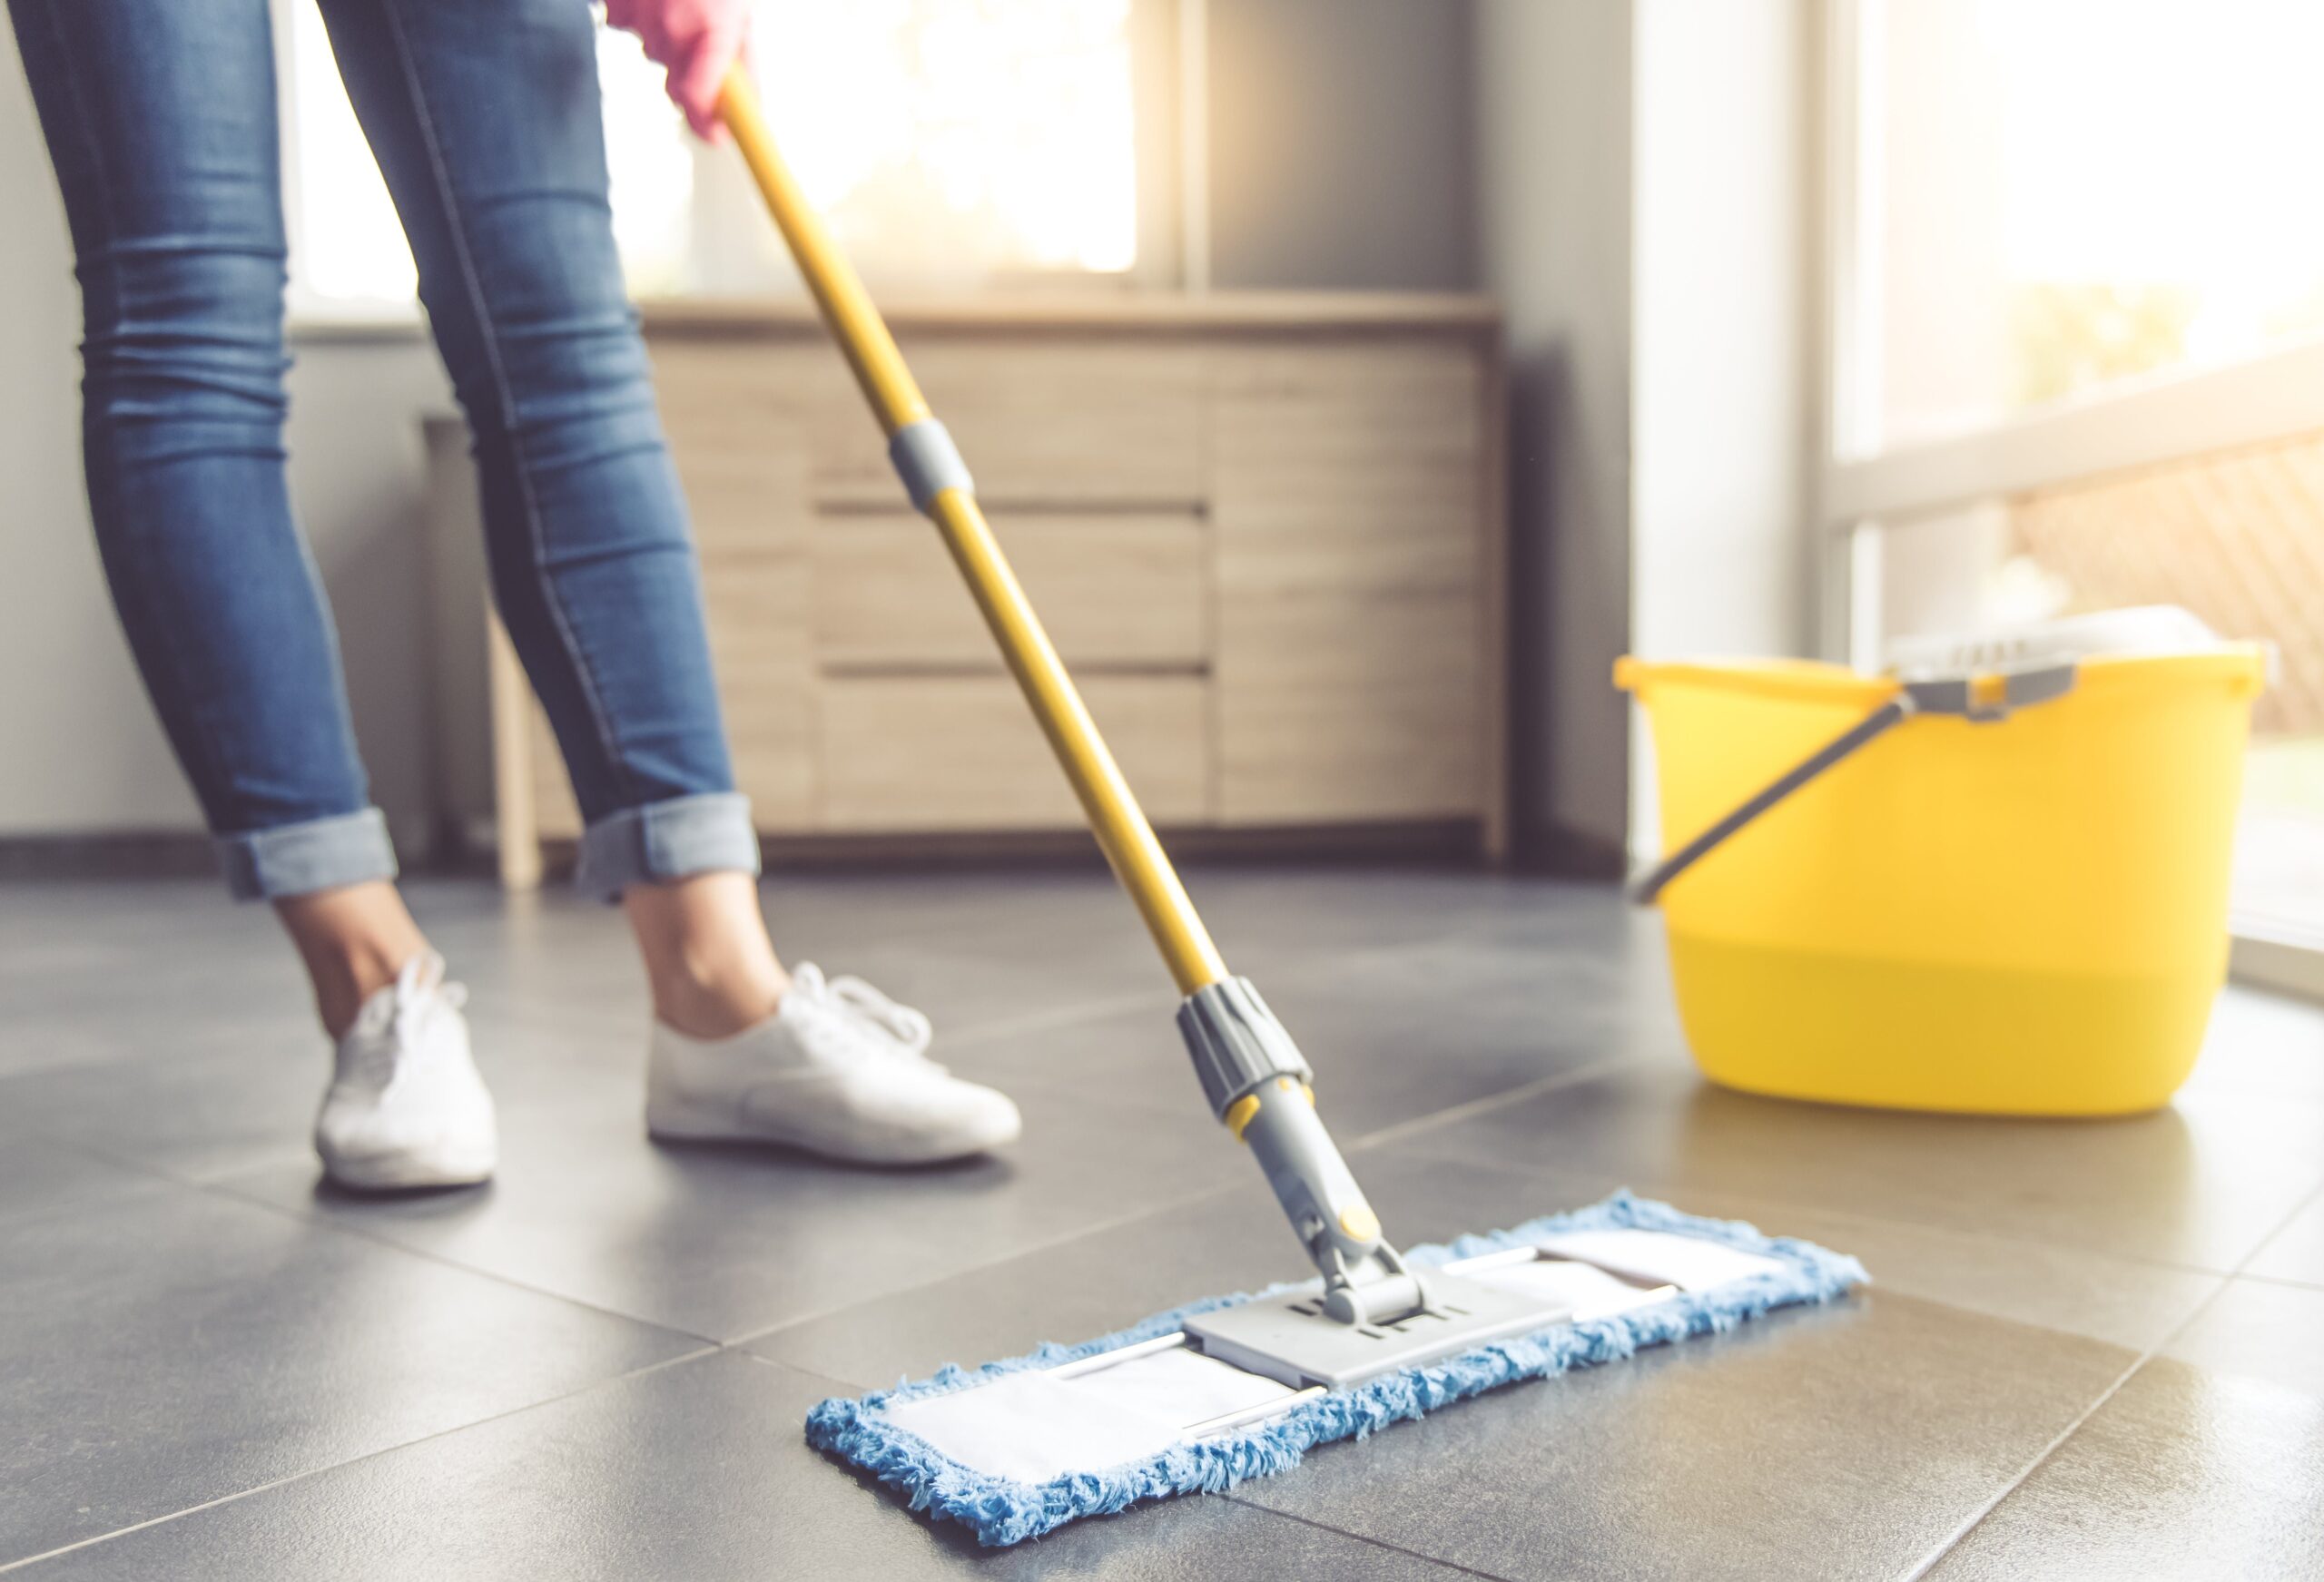 5 Reasons You Need a Vacate Cleaning When Leaving Property